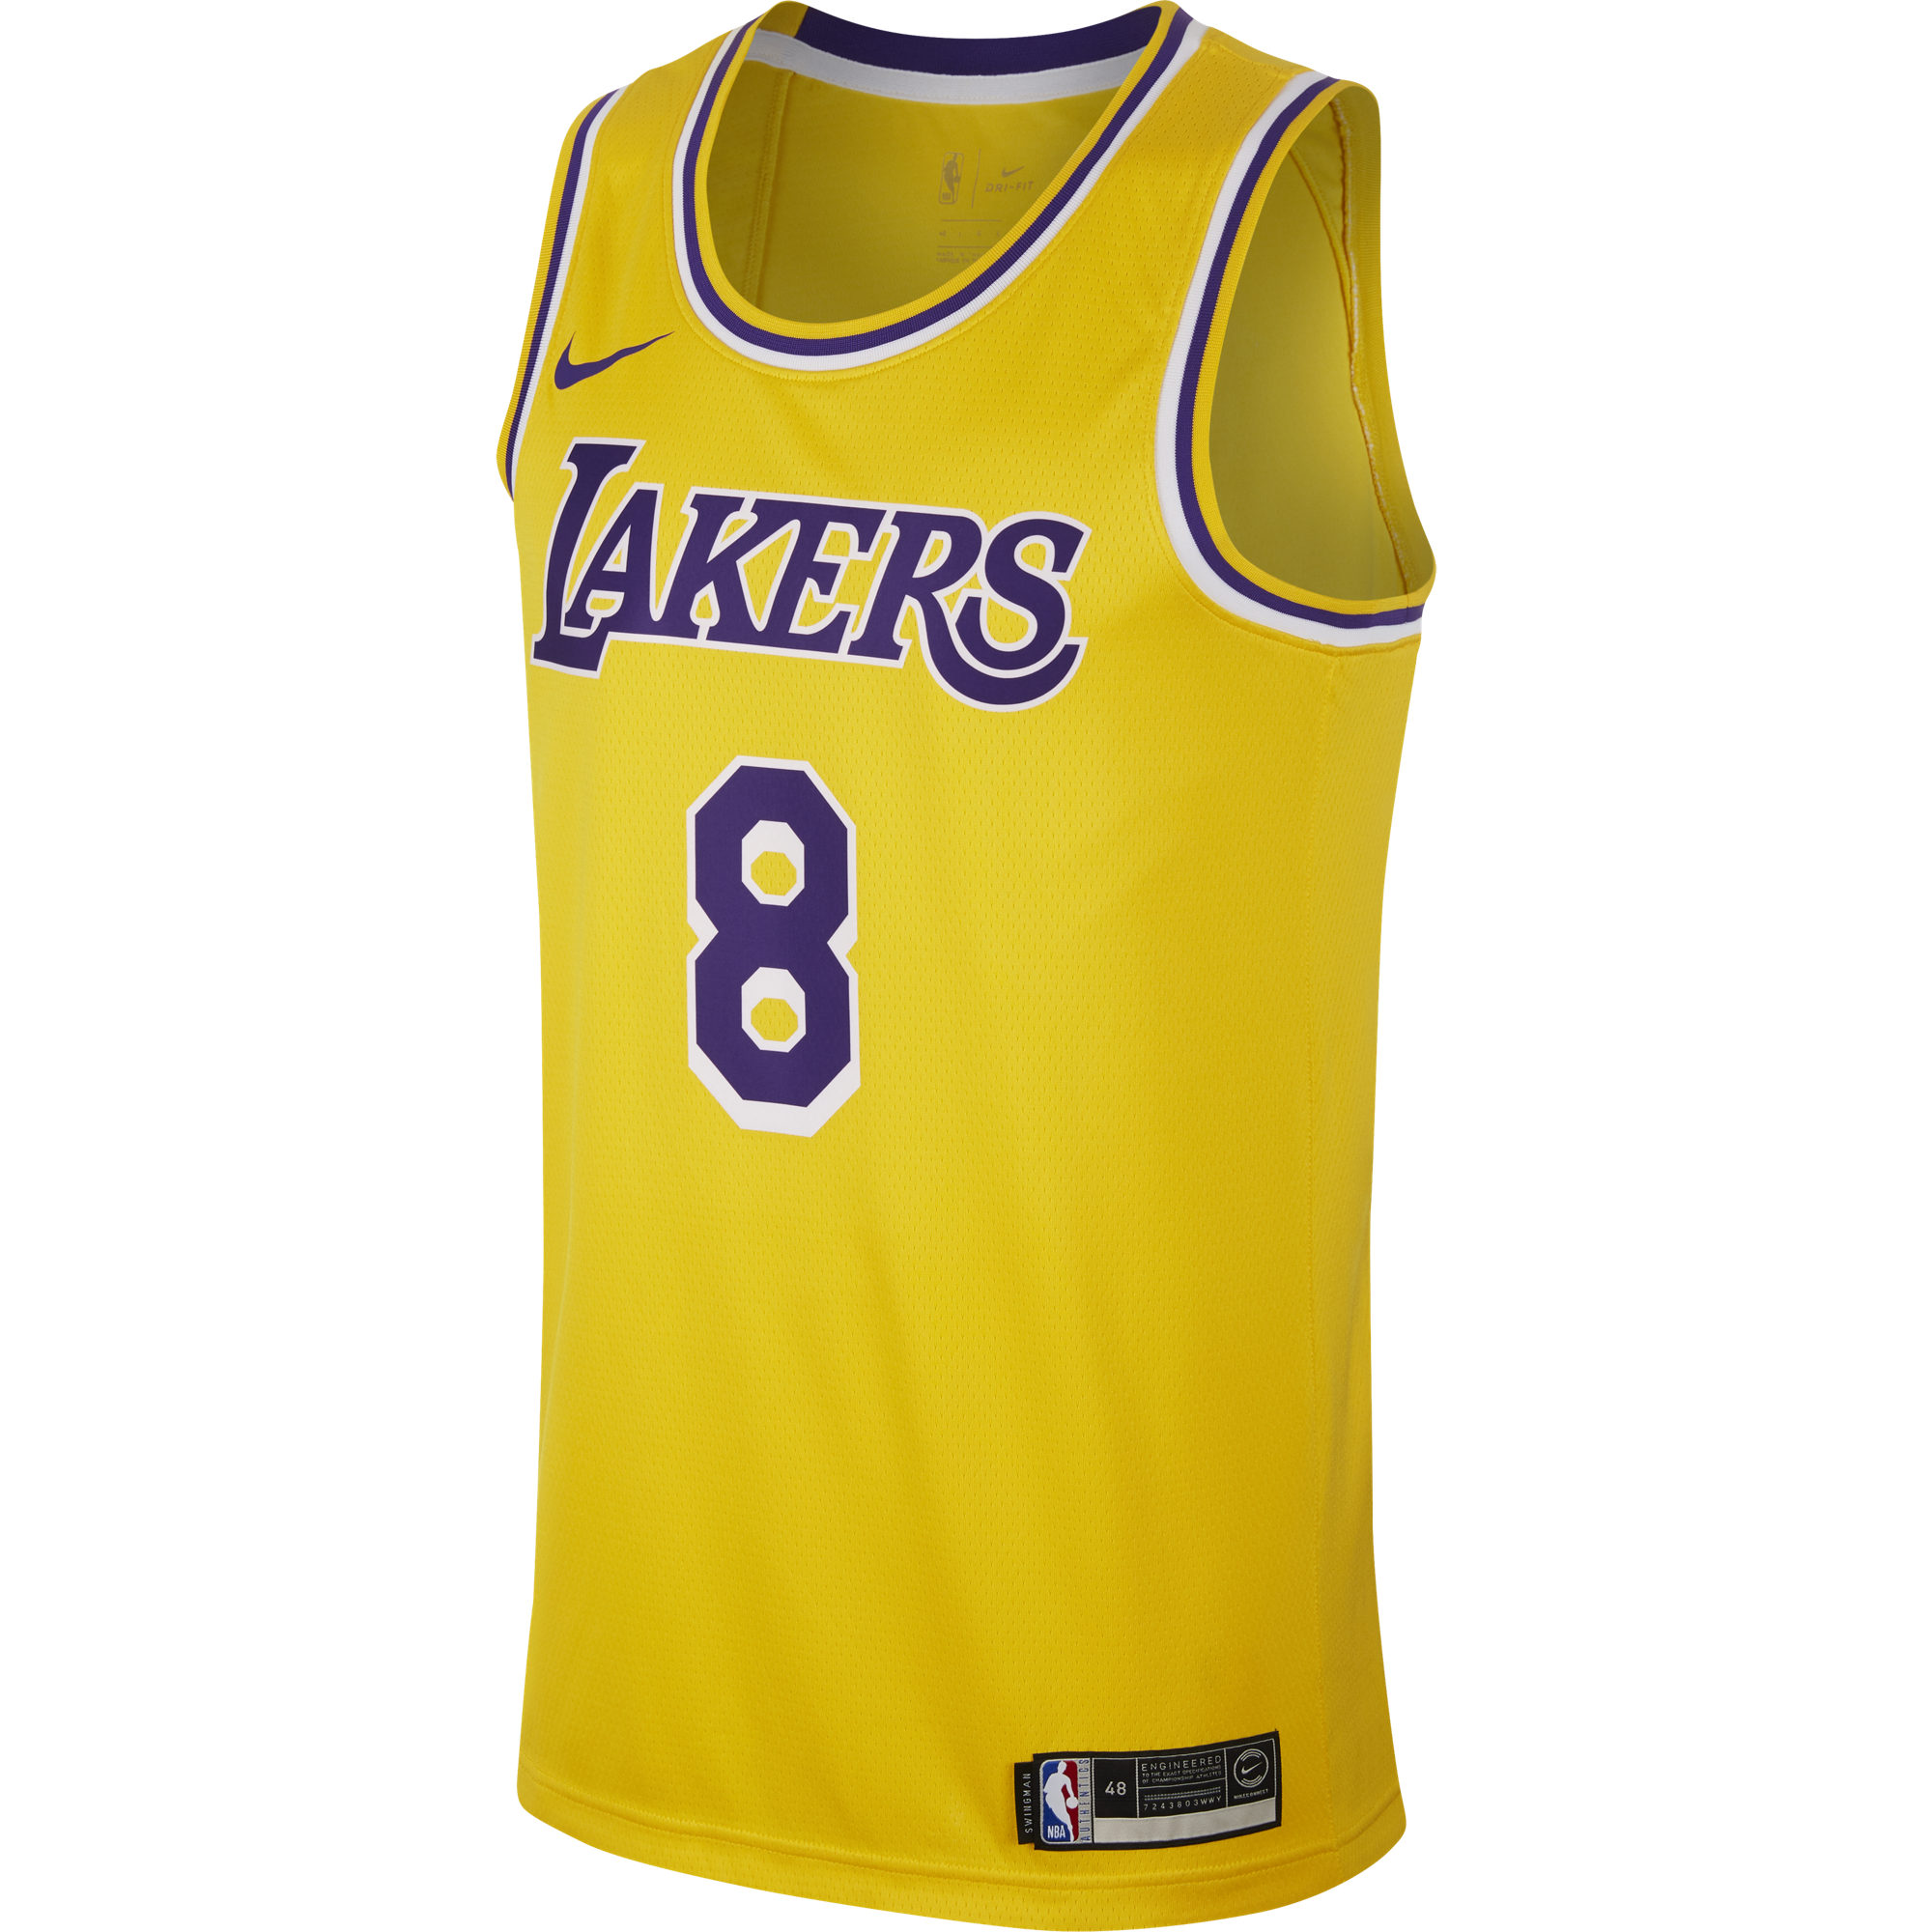 Lakers Jersey Png - PNG Image Collection